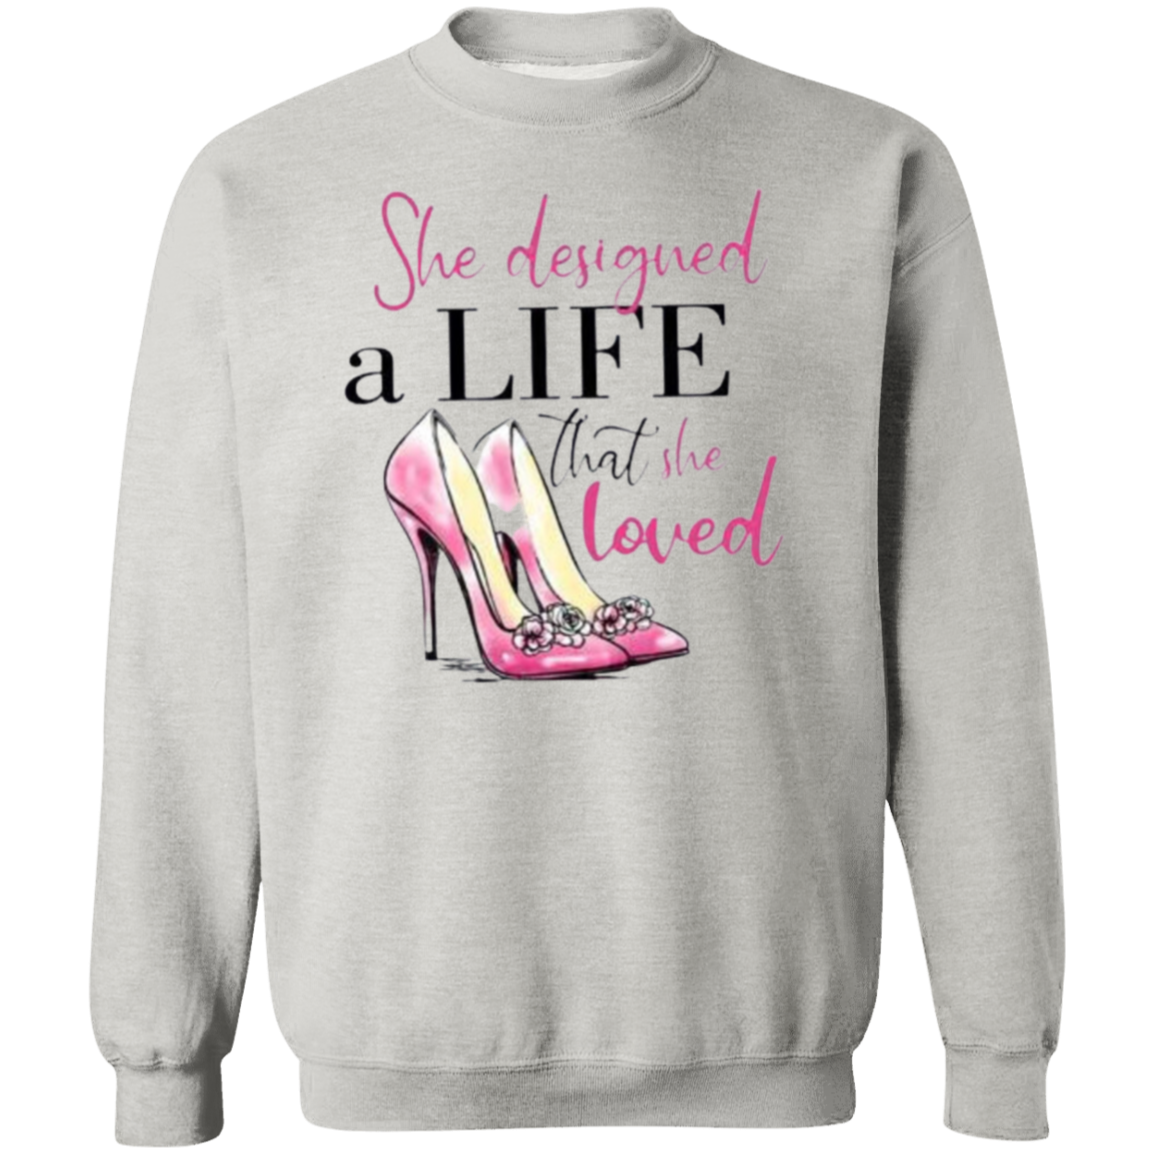 She designed a Life that she loved Sweatshirt